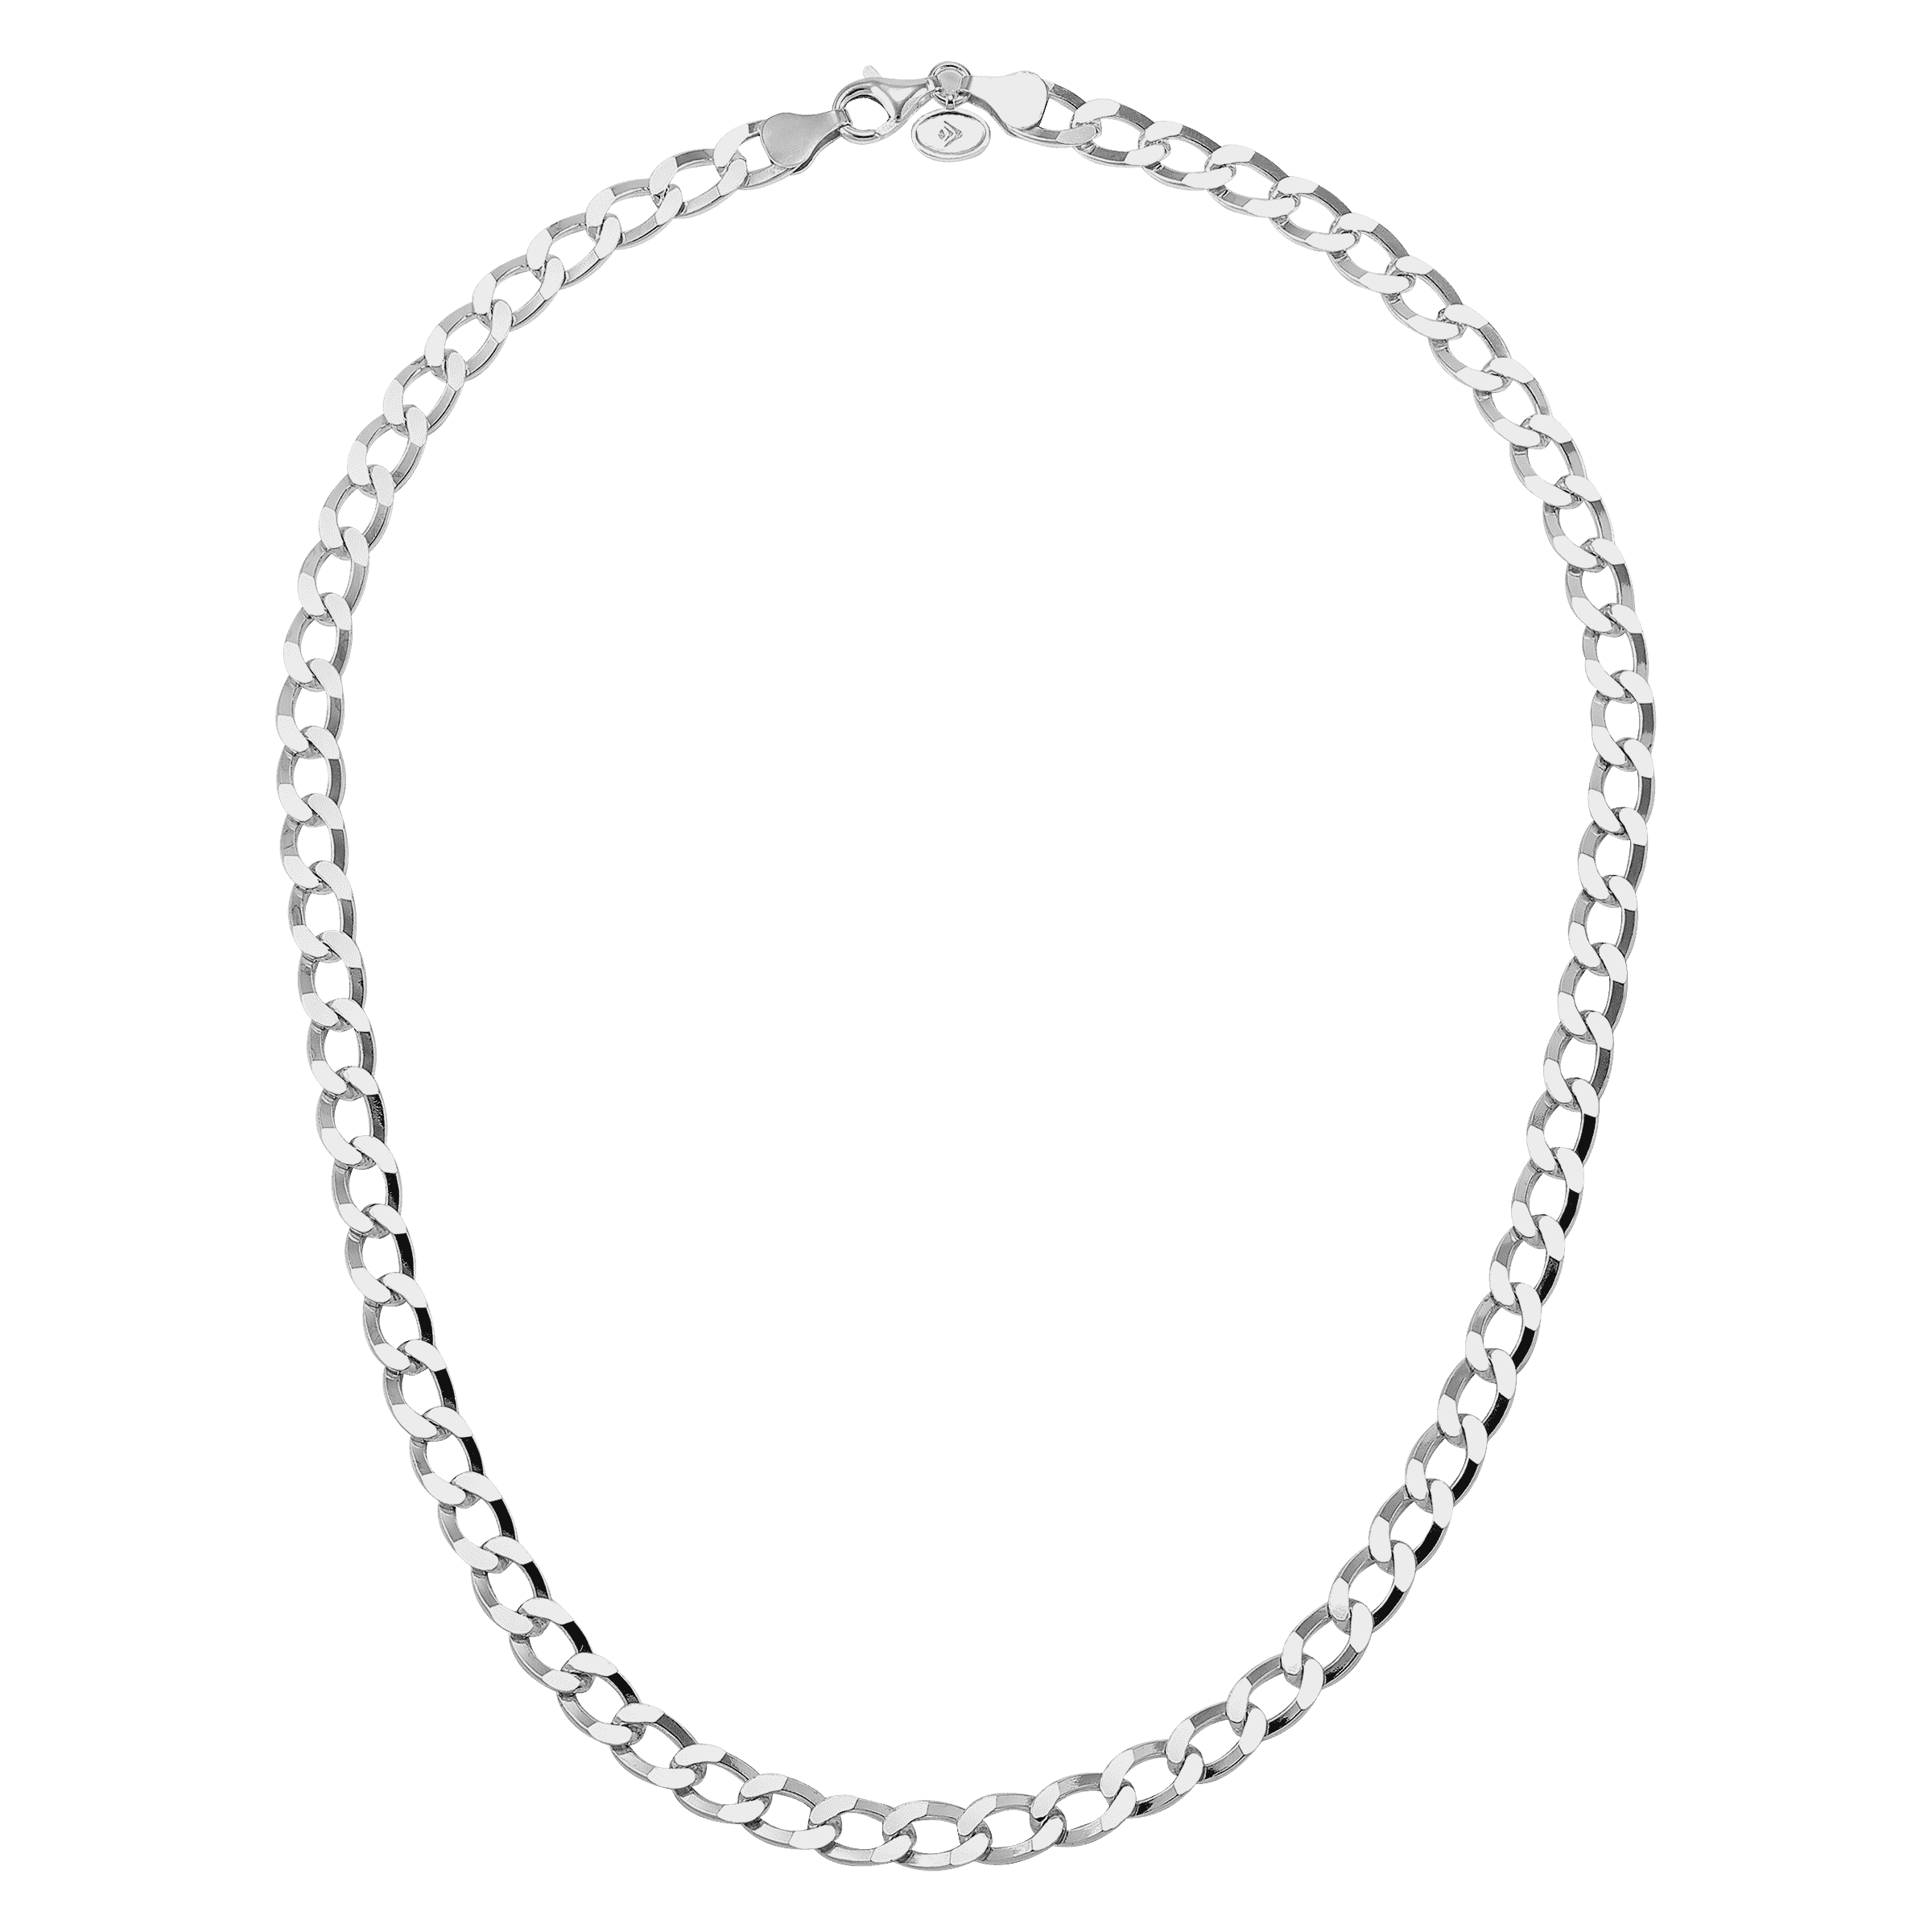 chain necklace png